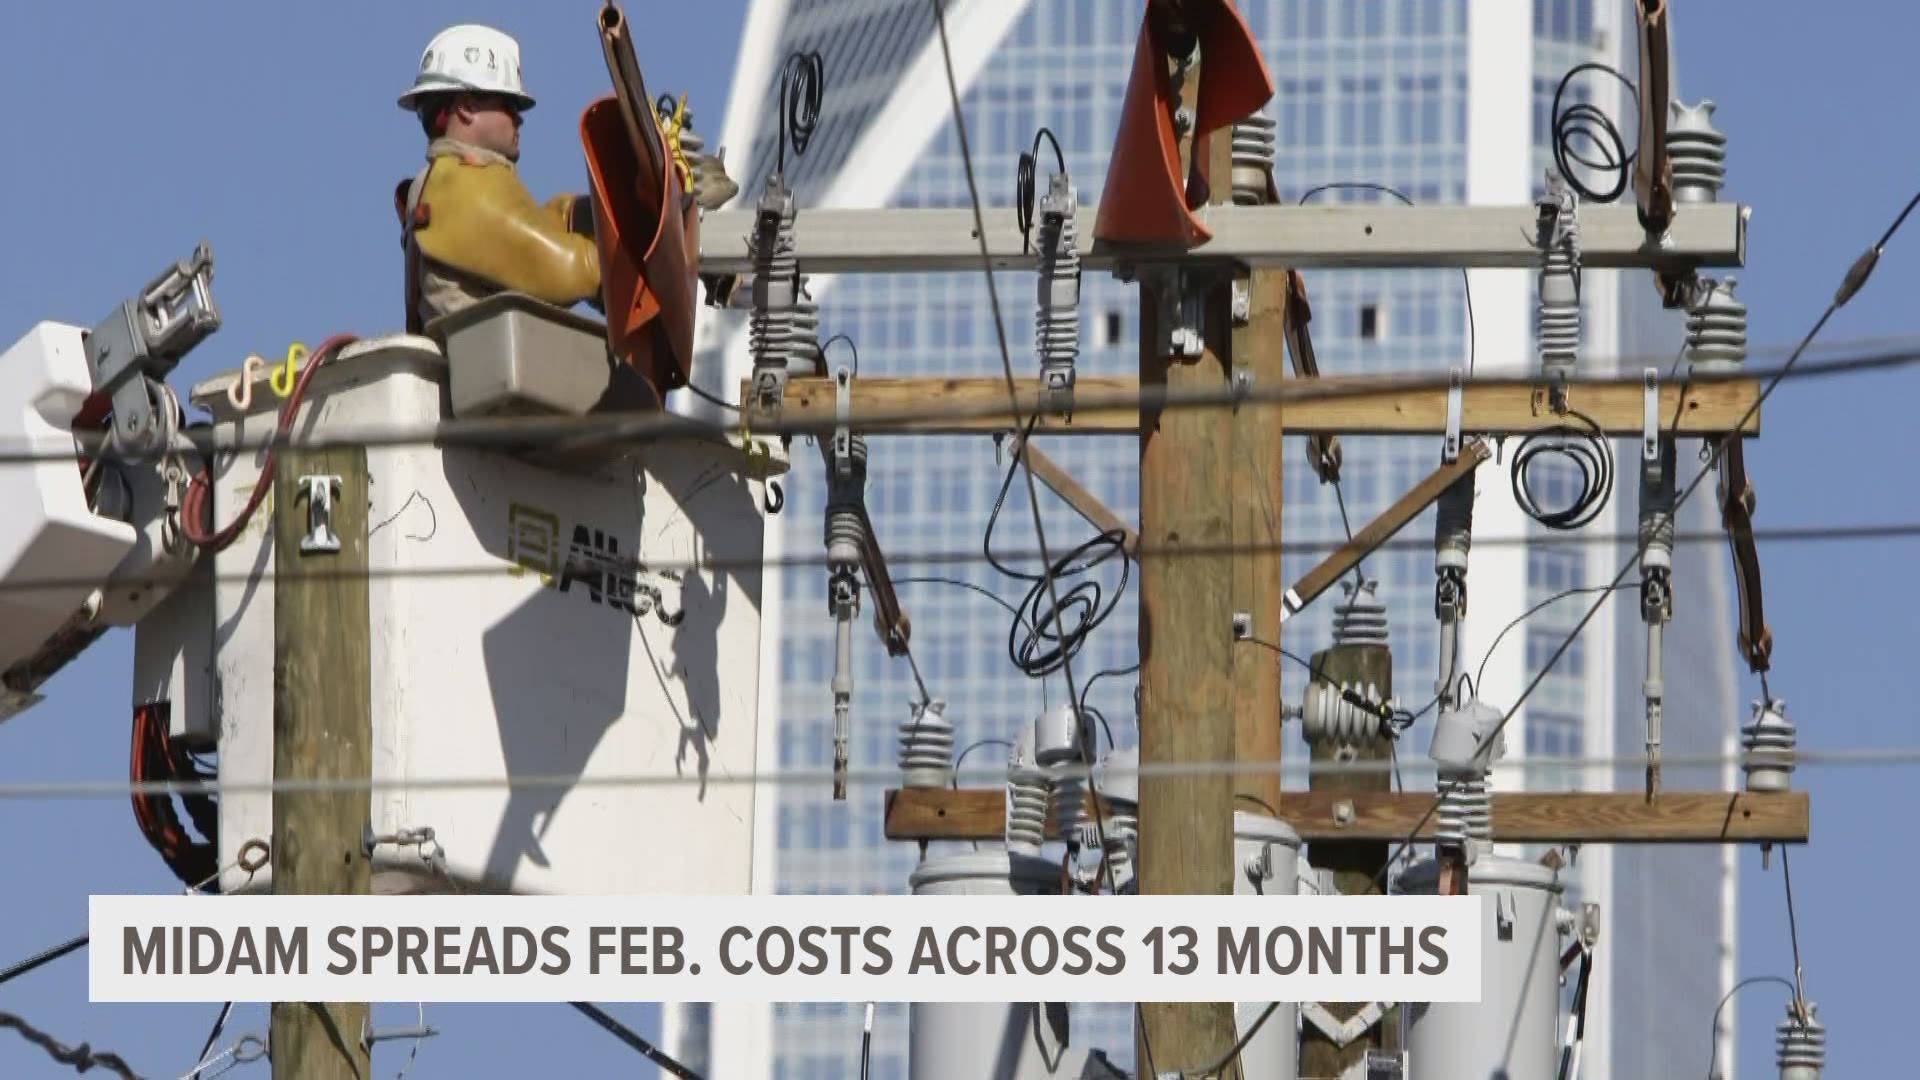 Energy costs from February likely skyrocketed, so the energy company is spreading those costs through the next 13 months.